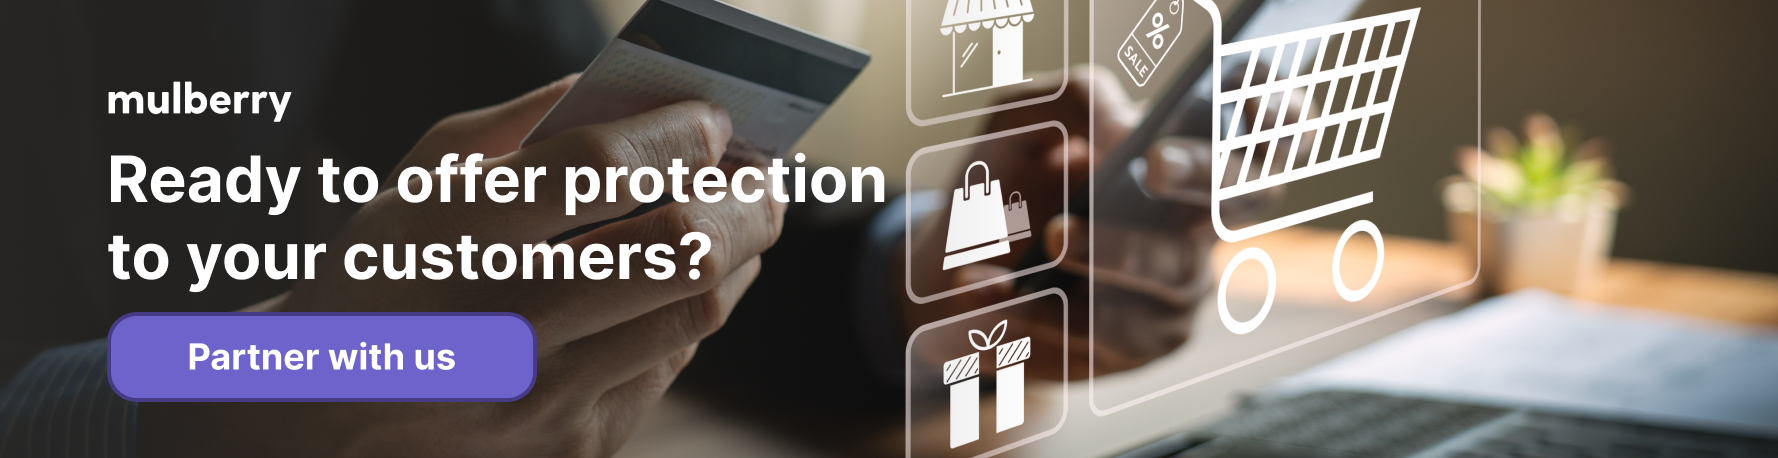 Ready to offer product protection to your customers?